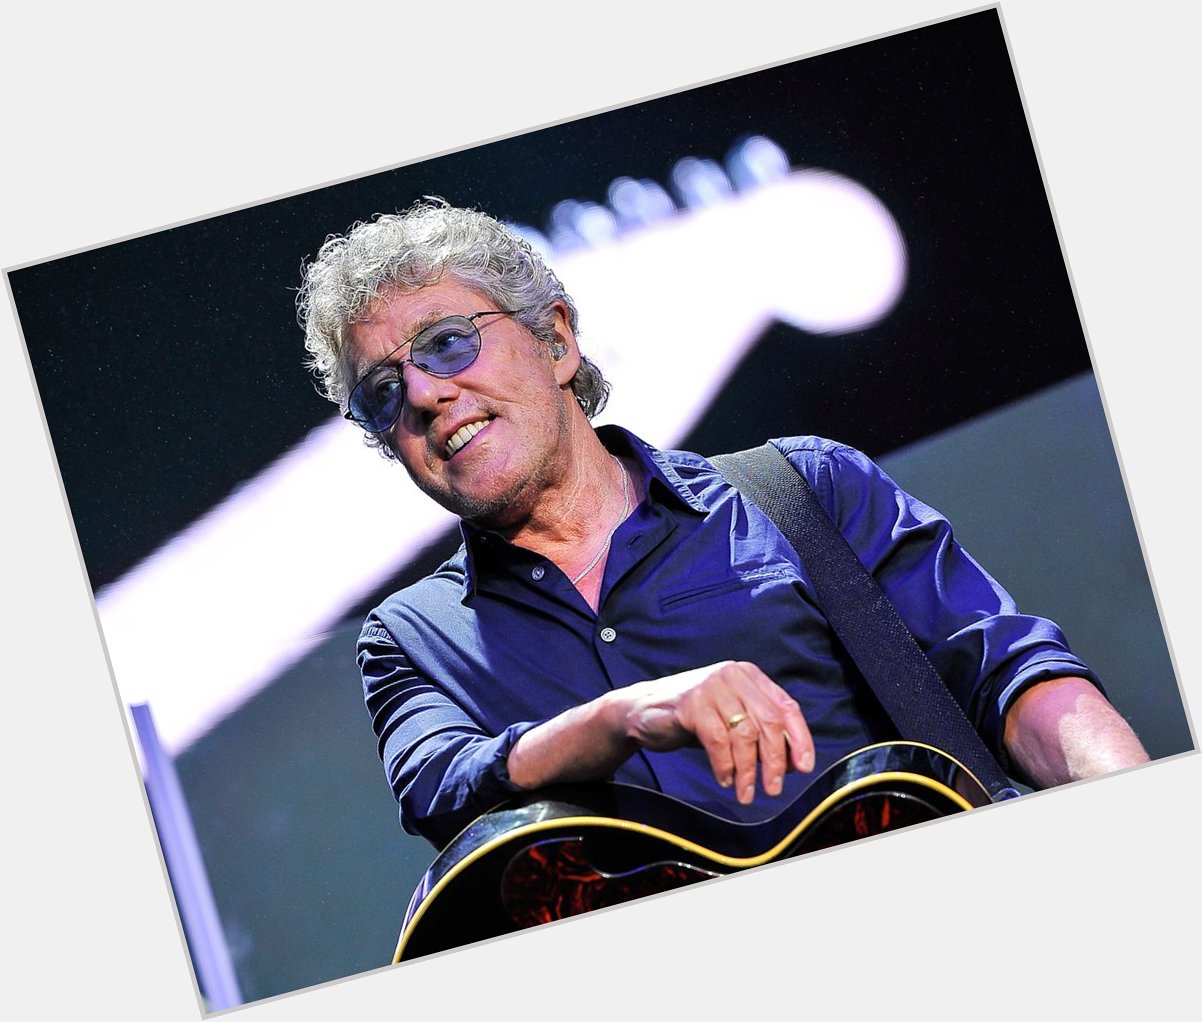 Please join me here at in wishing the one and only Roger Daltrey a very Happy 77th Birthday today  